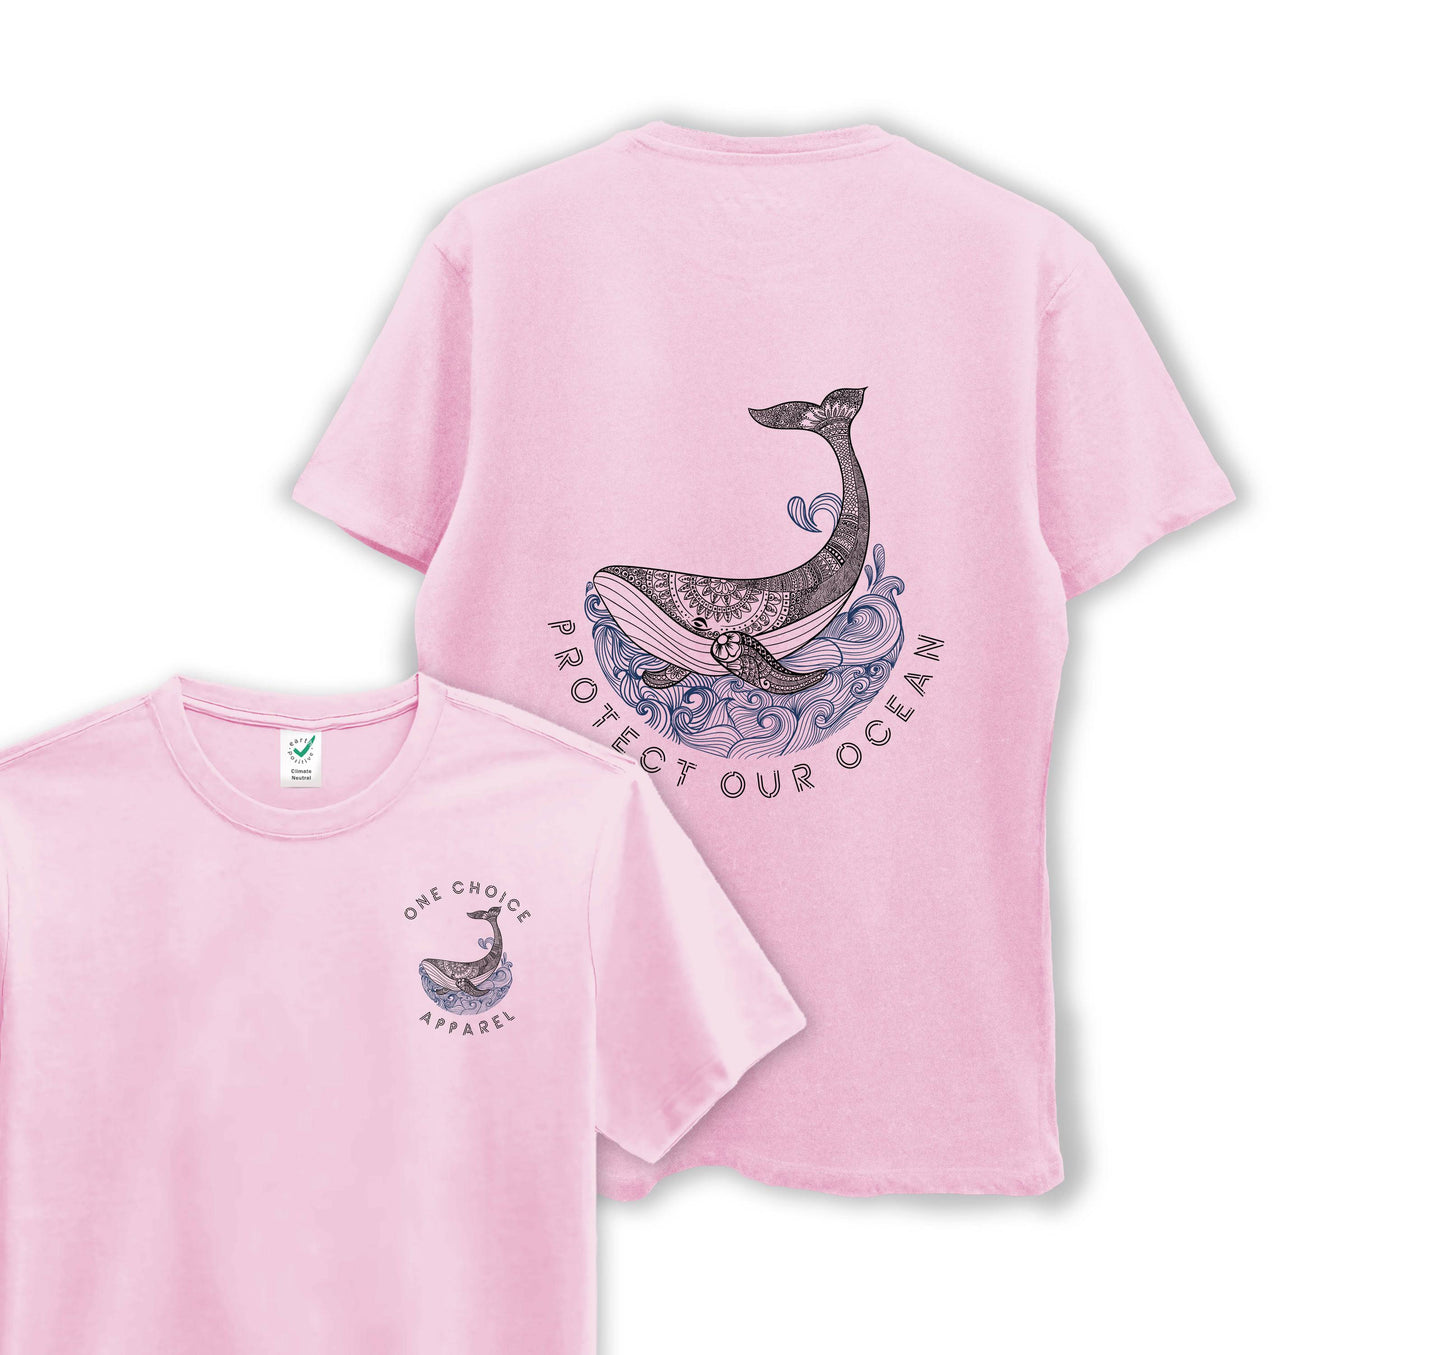 Protect Our Ocean - Organic Cotton Tee - One Choice Apparel